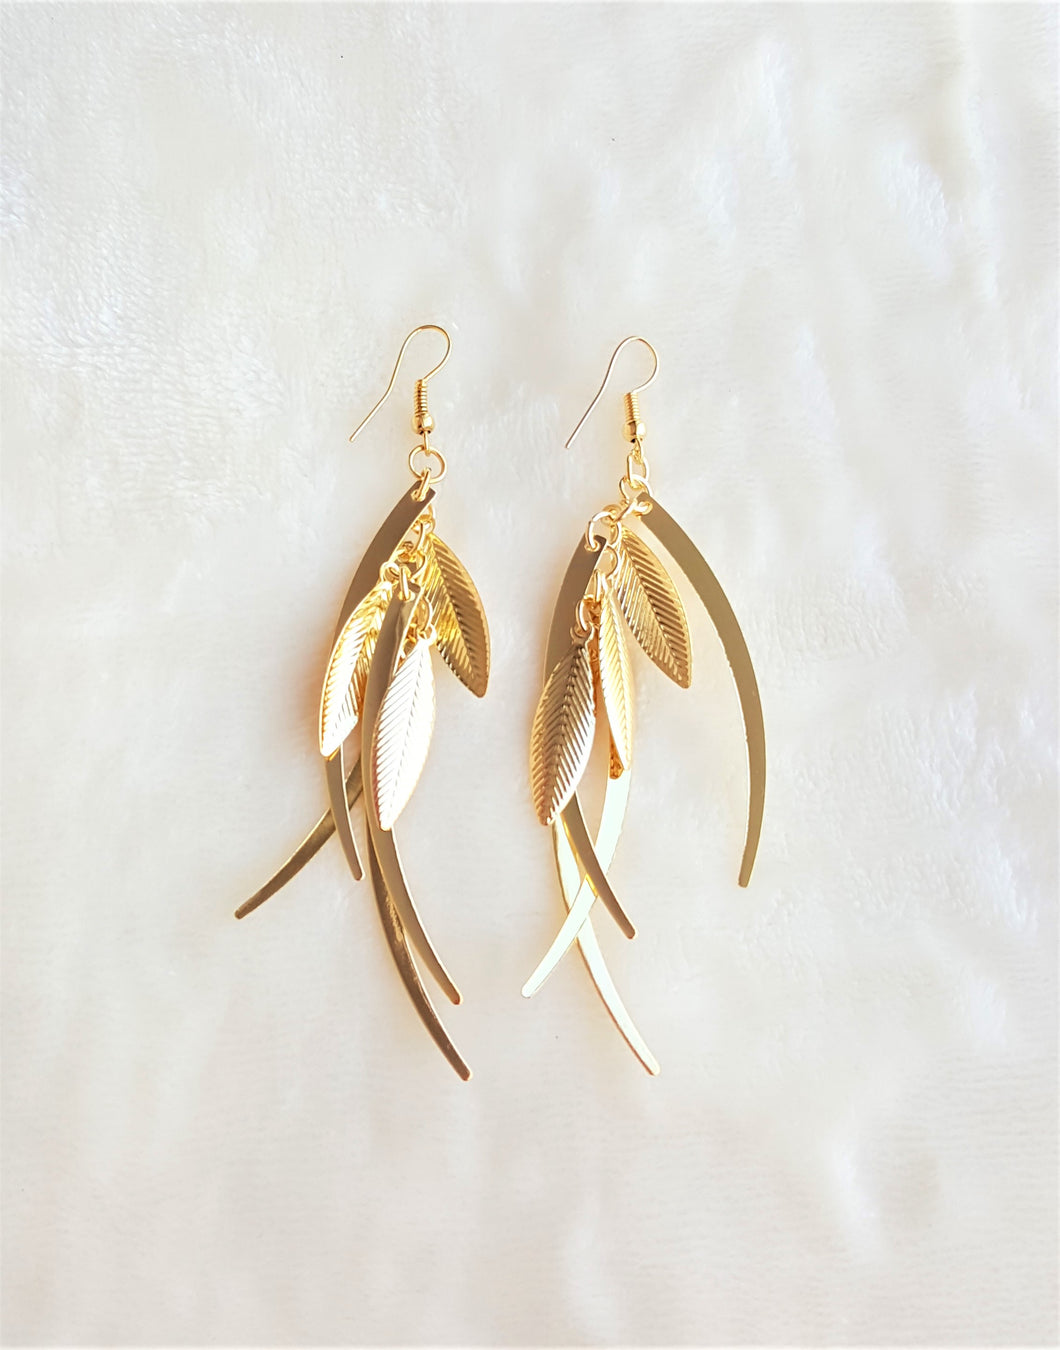 Fashion Earrings Leaves Gold tone Trendy Style Party wear Light weight Earrings by UrbanFlair - Urban Flair USA